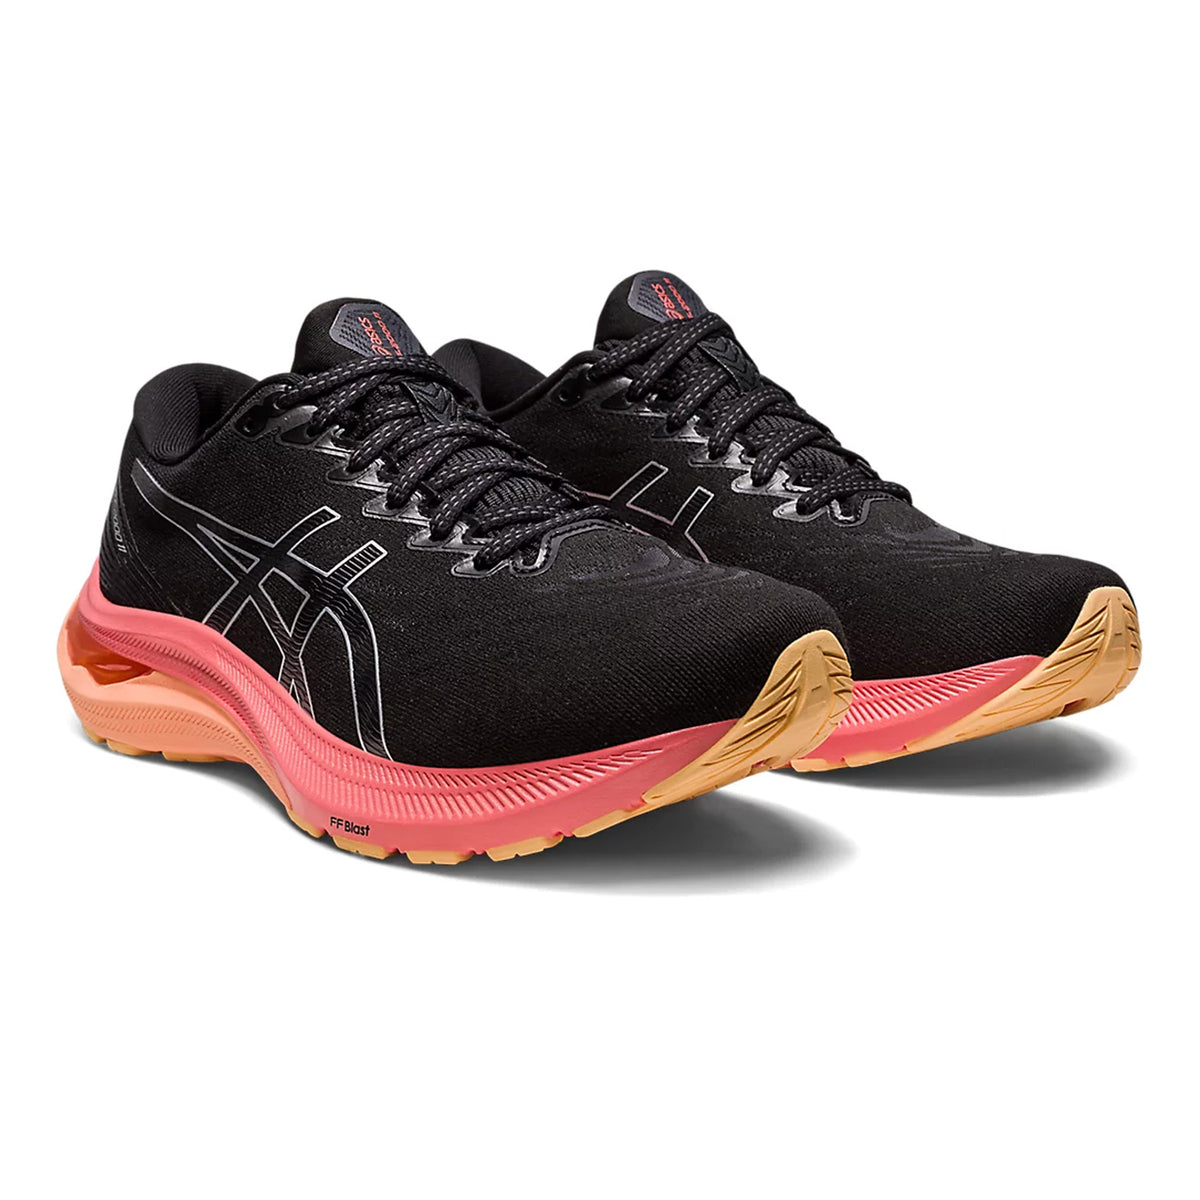 Asics GT-2000 11 Womens Running Shoes: Black/Pure Silver